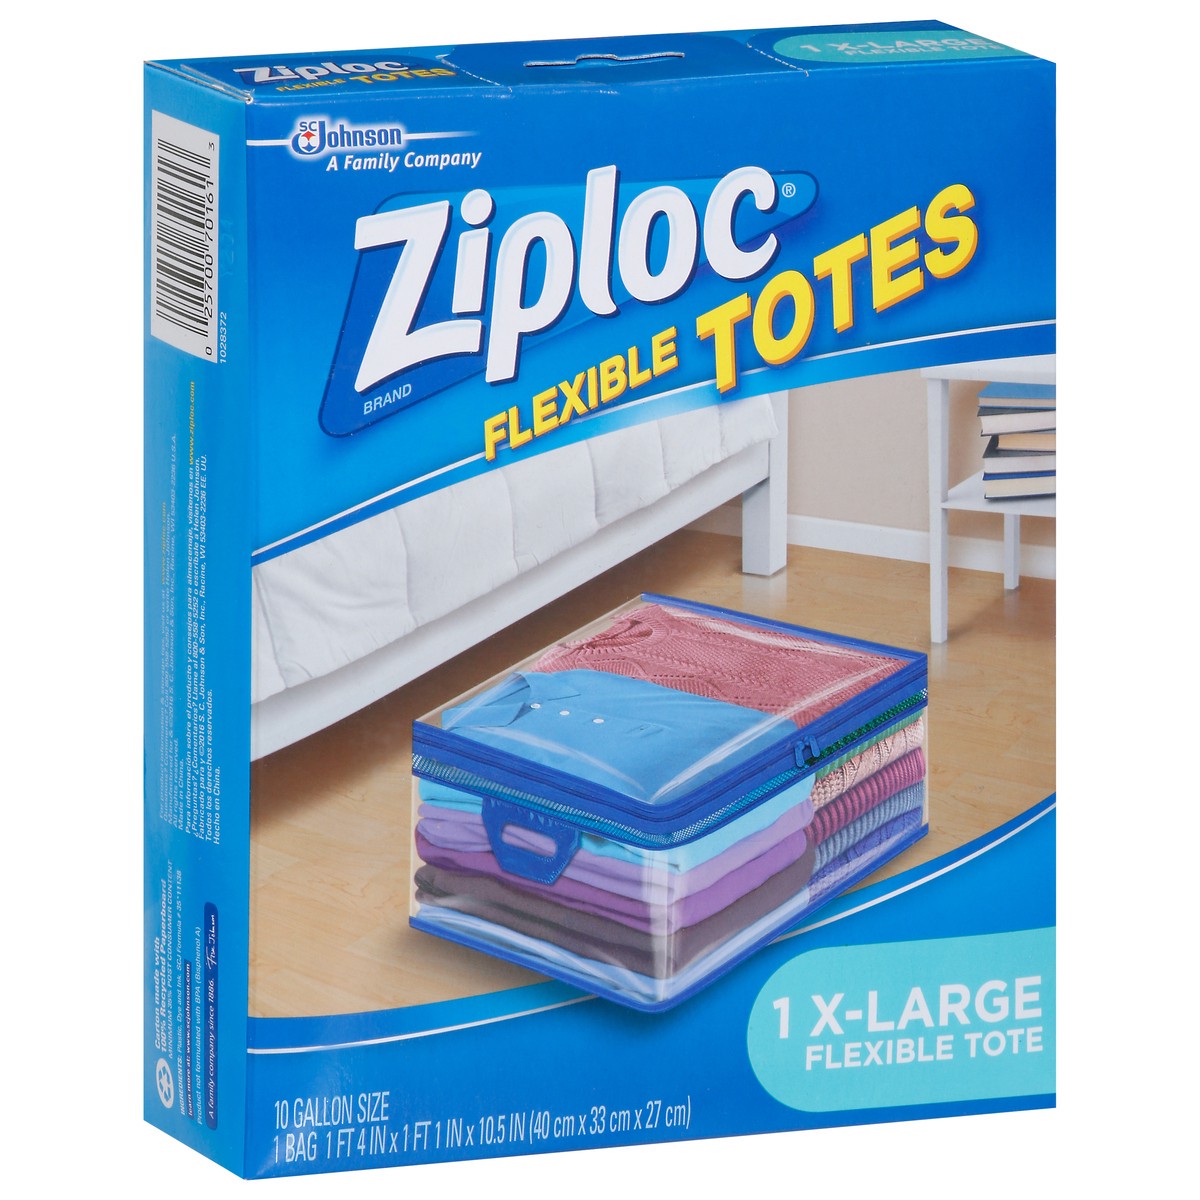 slide 7 of 9, Ziploc Flexible Totes, X-Large, 1 CT, Easy-Close Zipper, Soft-Sided, Rectangular Bags, Built-In Handles, Thick Semi-Transparent Plastic, Flexible to Fit Where You Want Them, 1 ct